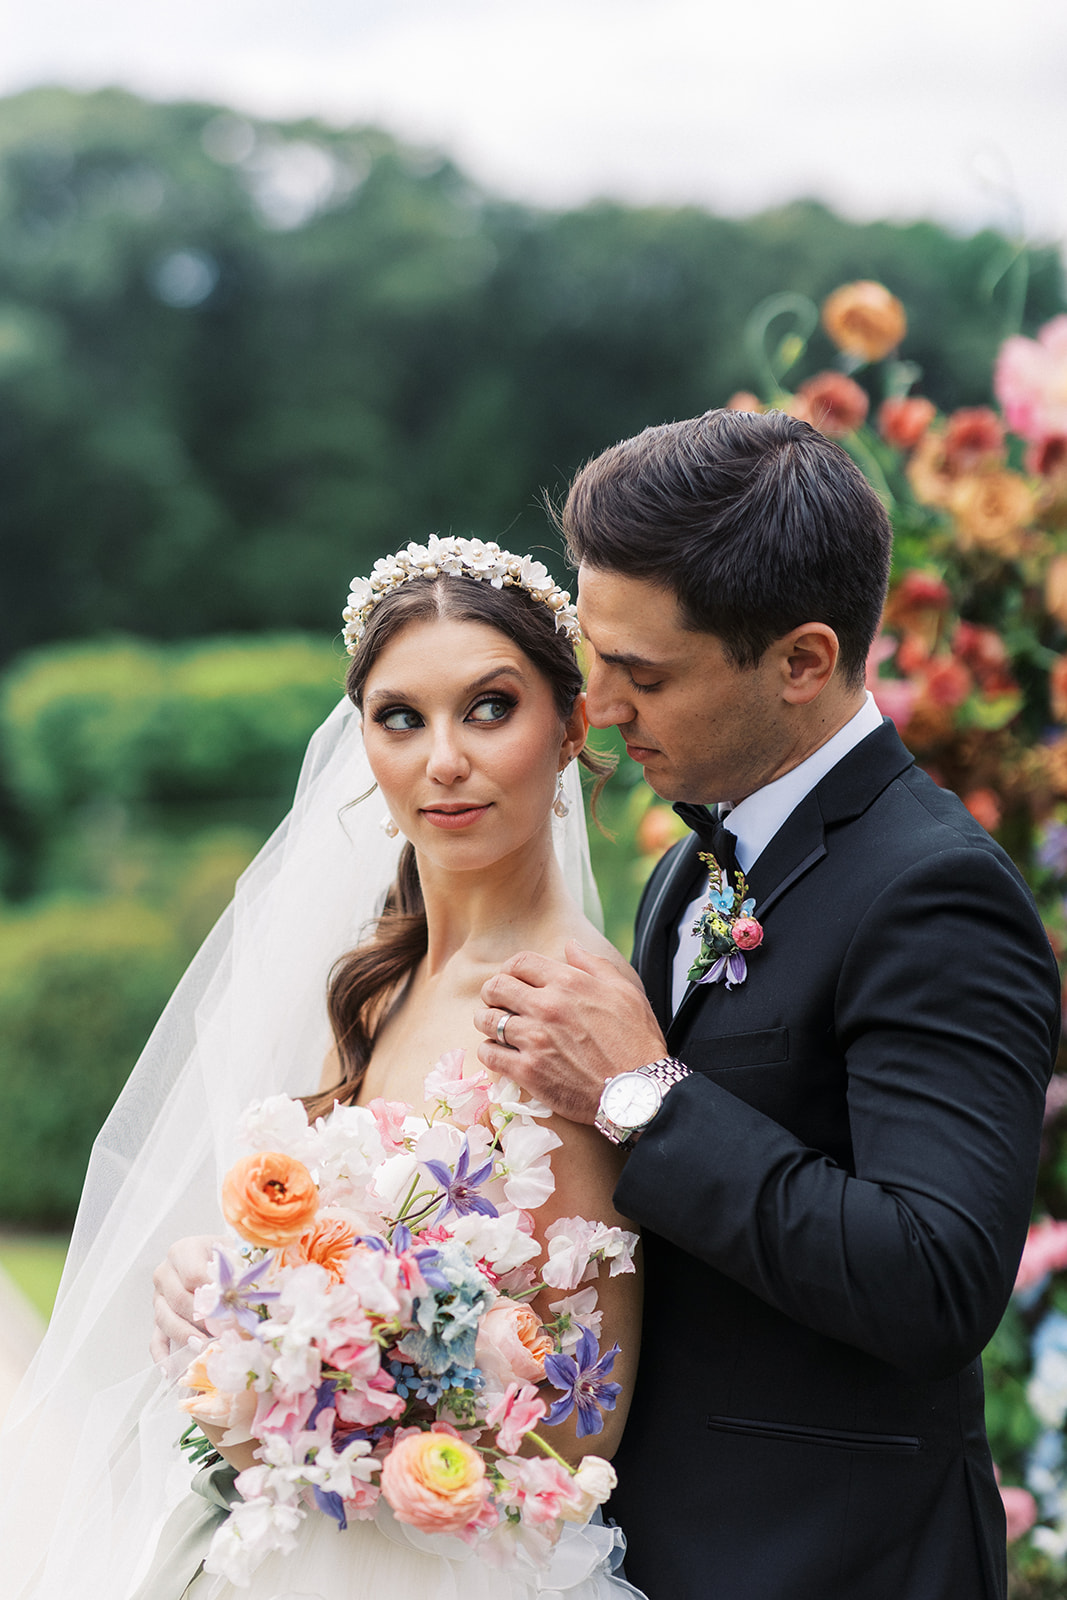 Newlyweds stand in a garden in a black tuxedo and long veil